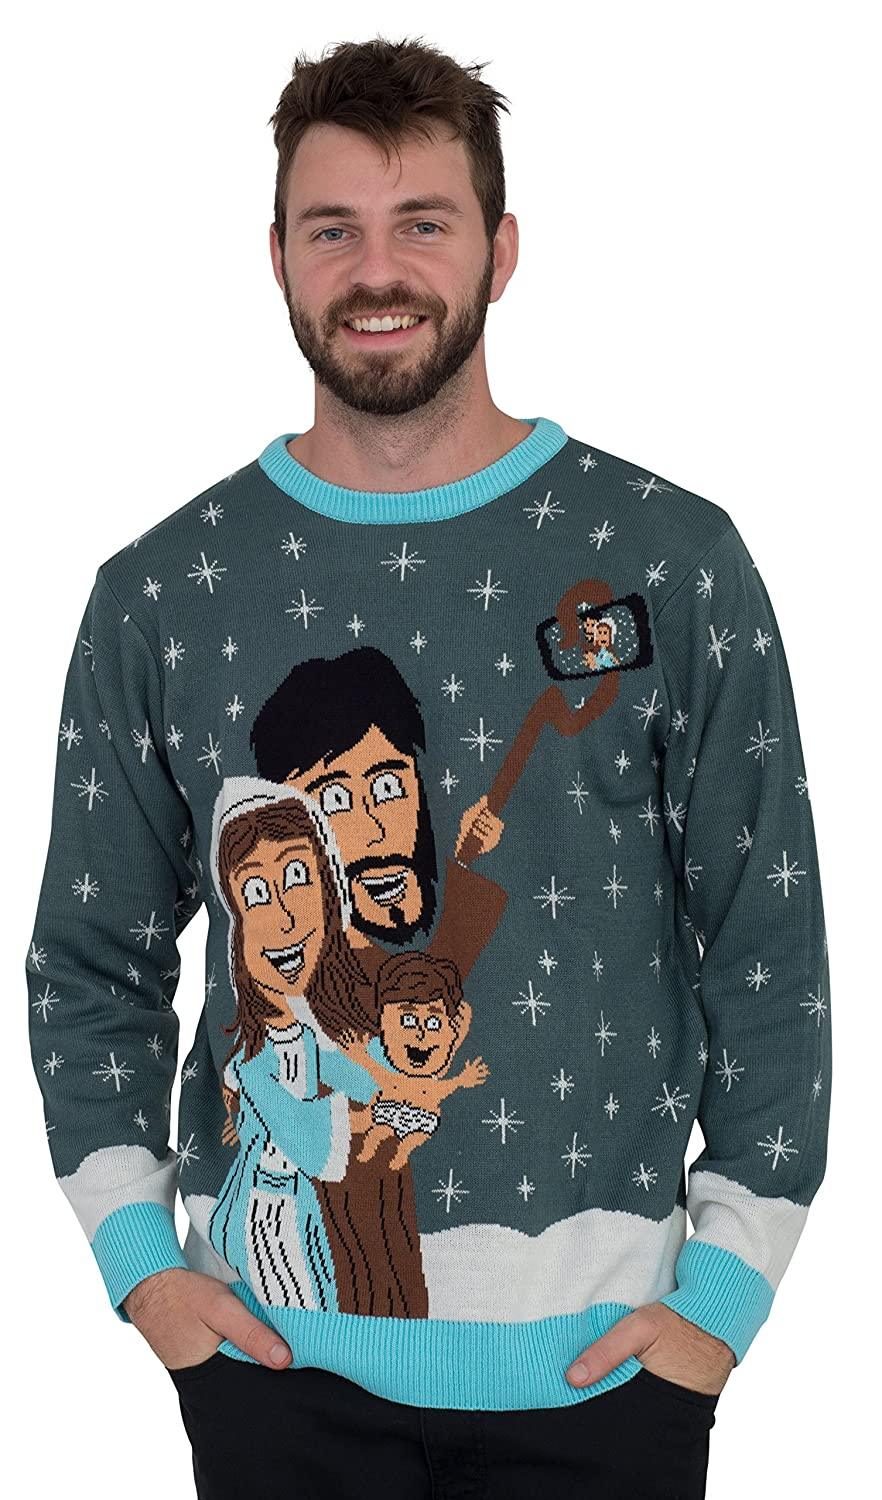 Jesus Selfie Stick Family Picture Ugly Christmas Sweater - TVStoreOnline